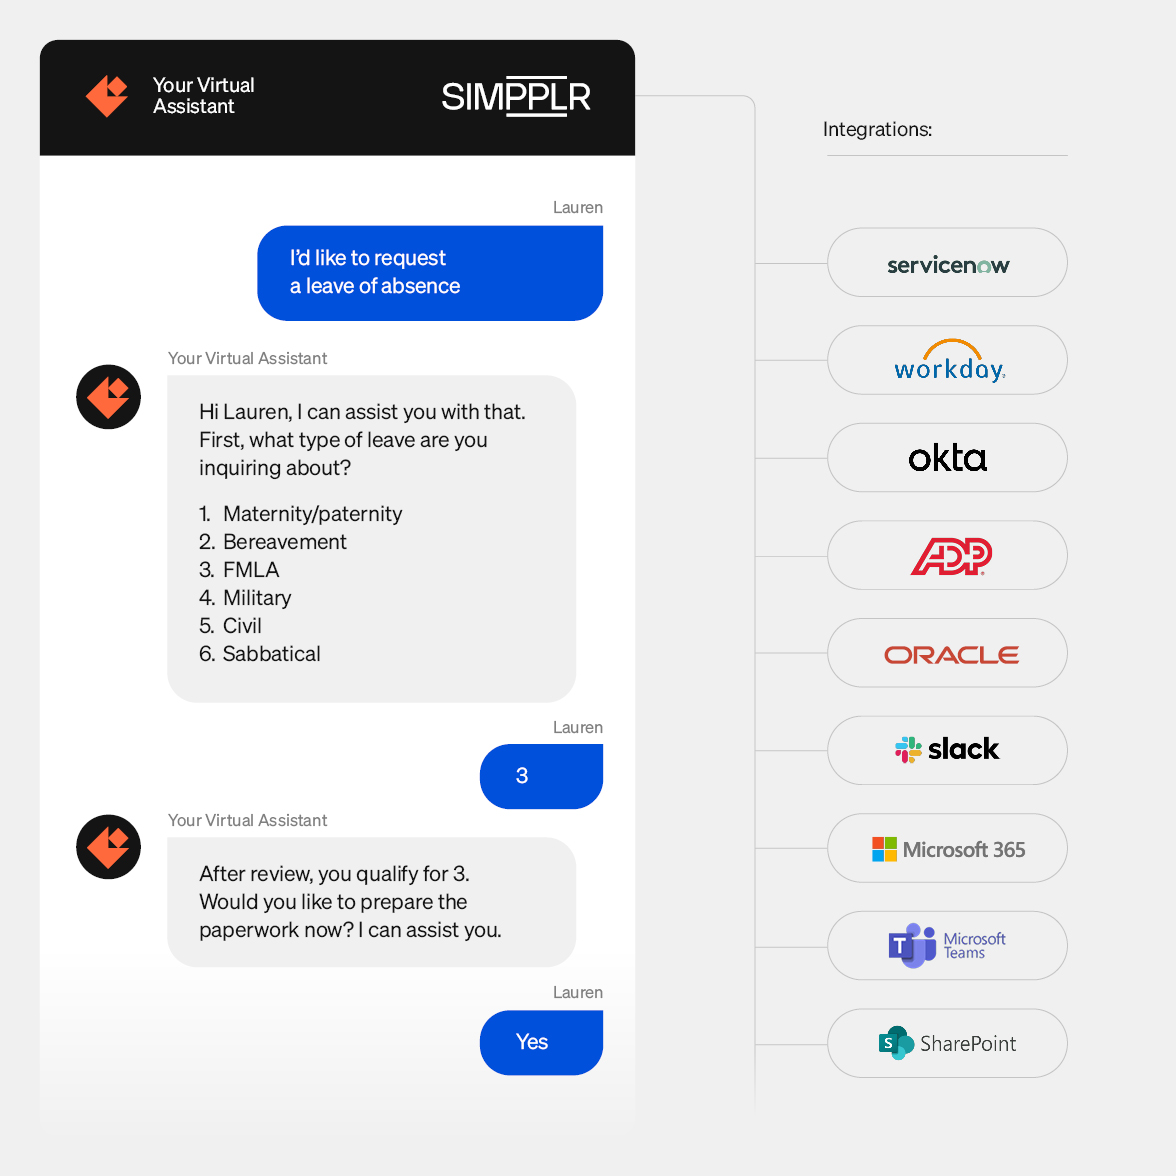 Knowledge management using an AI assistant